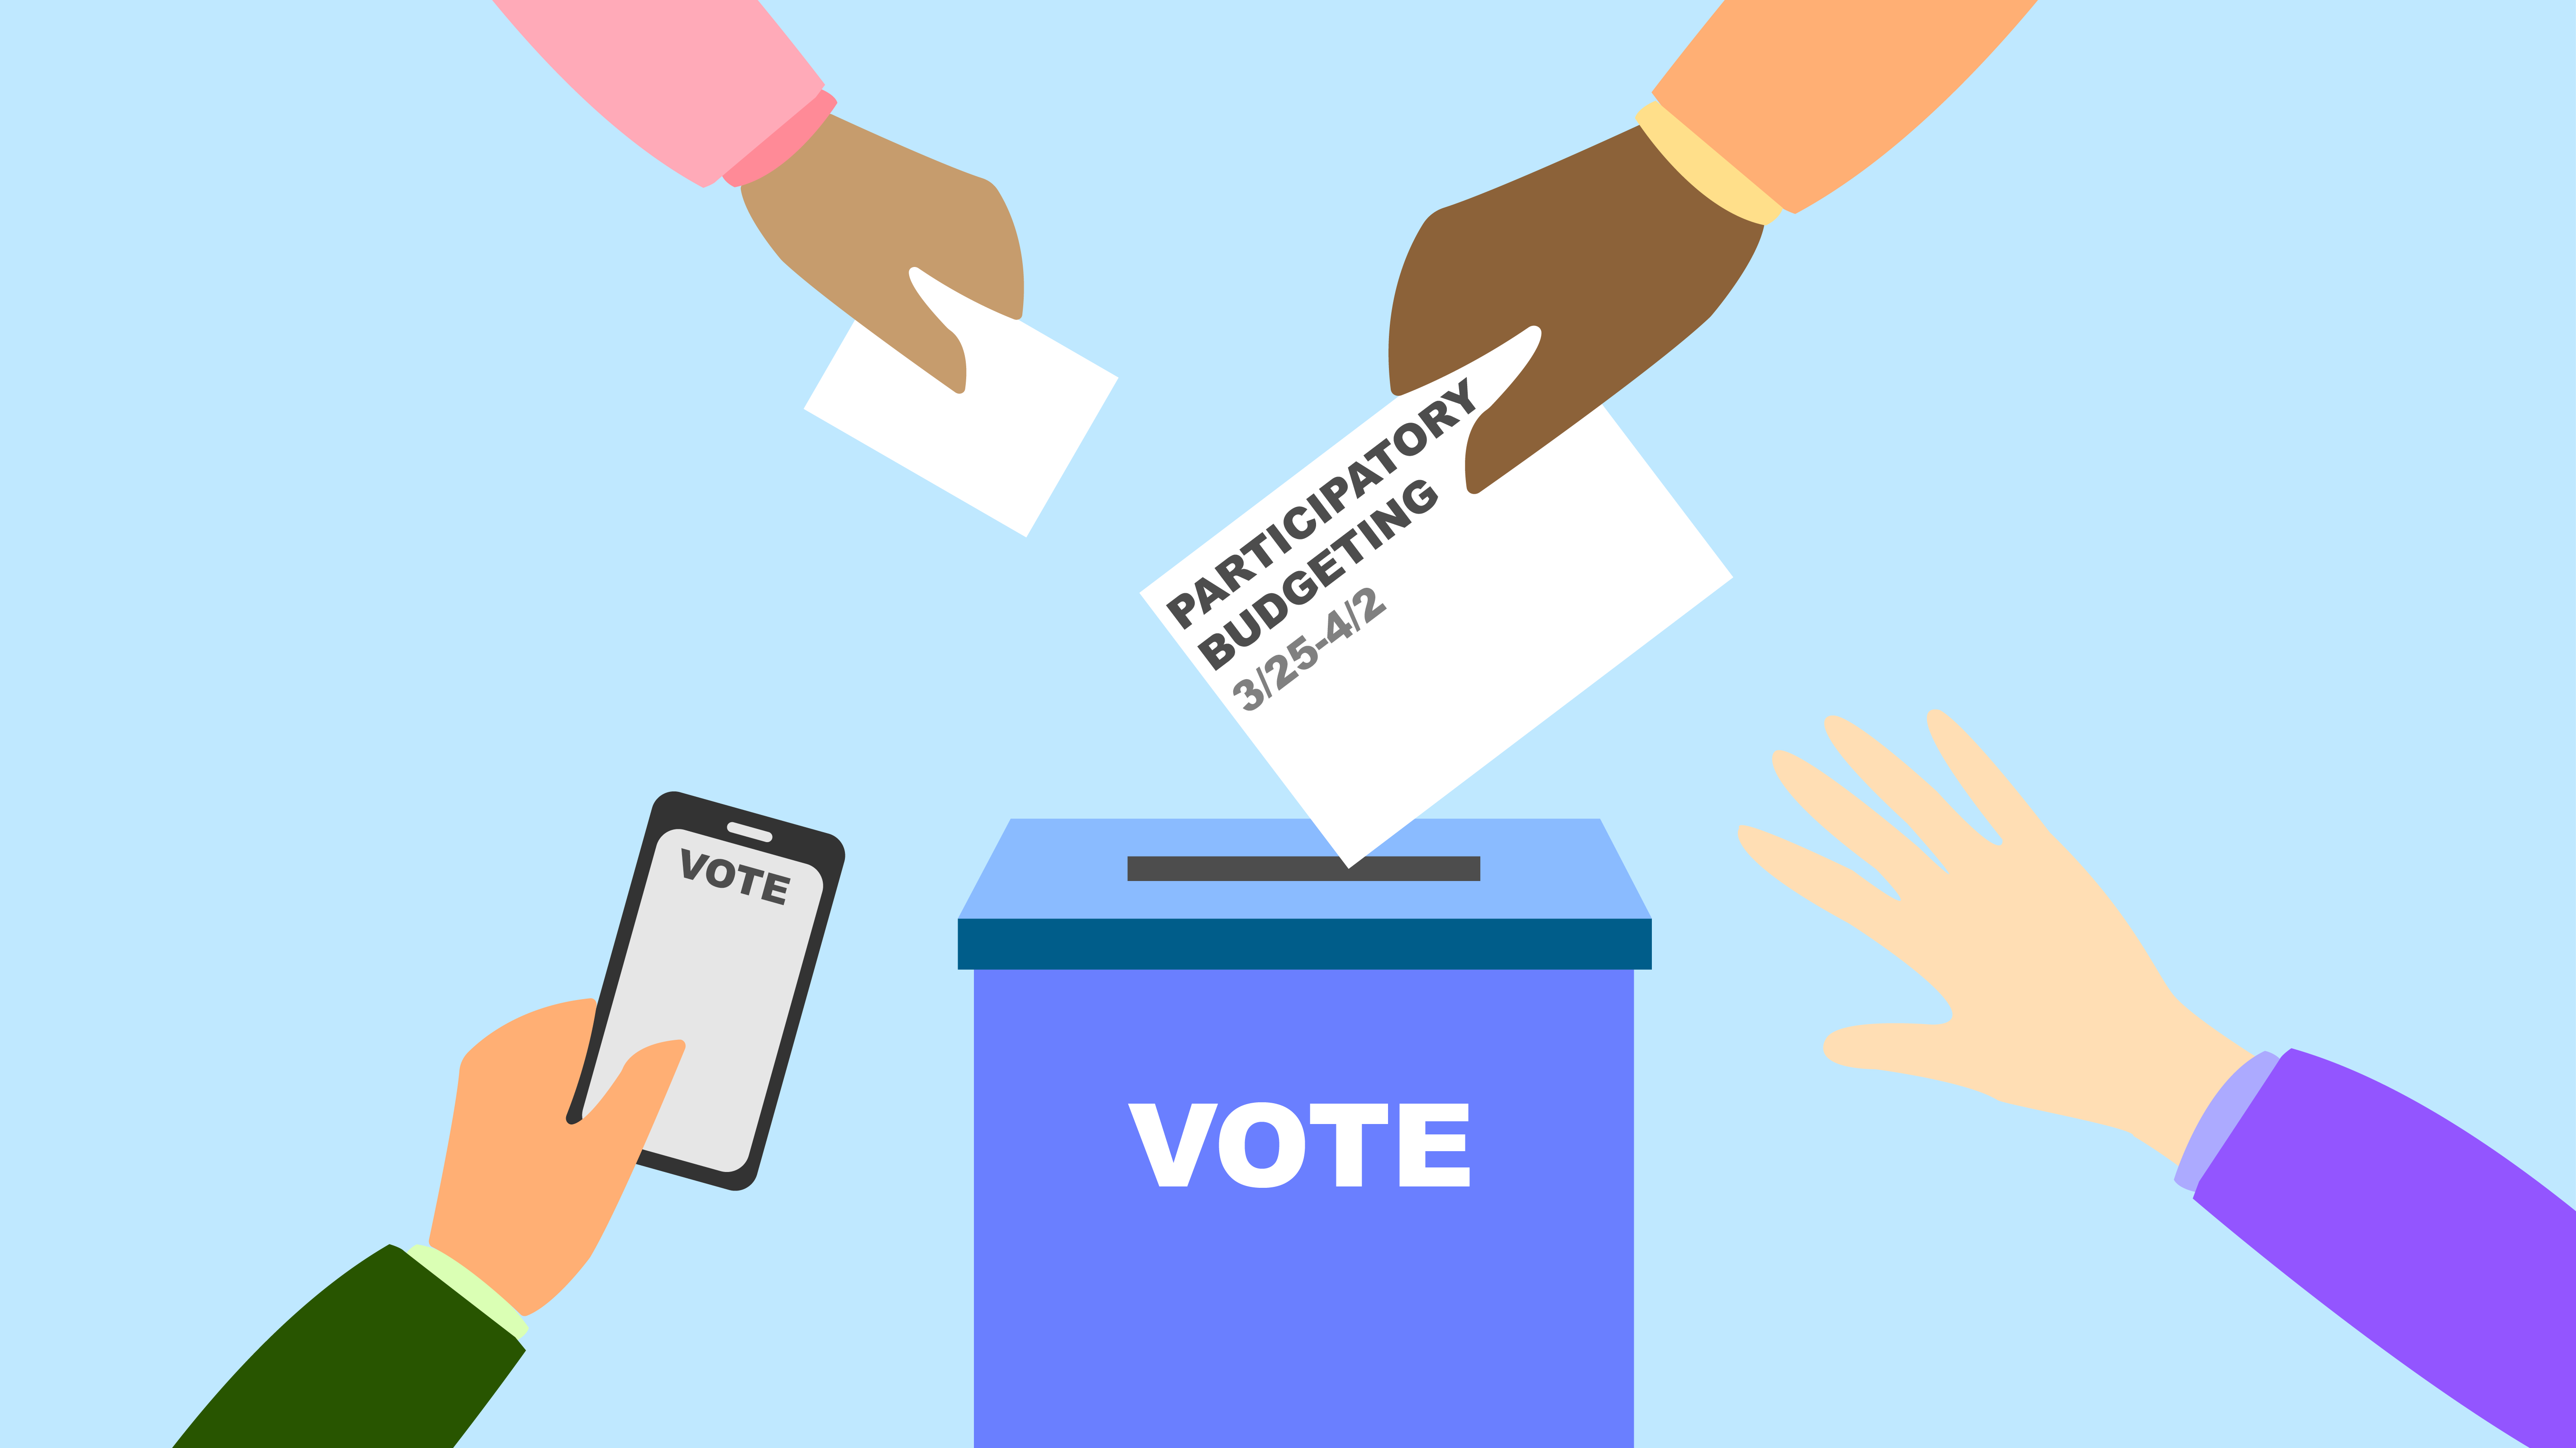 On a light blue background, four hands reach towards a dark blue ballot box with the word ‘vote’ on it in white, all capital letters. Two of the hands are holding white paper ballots and one of the hands is holding a phone.